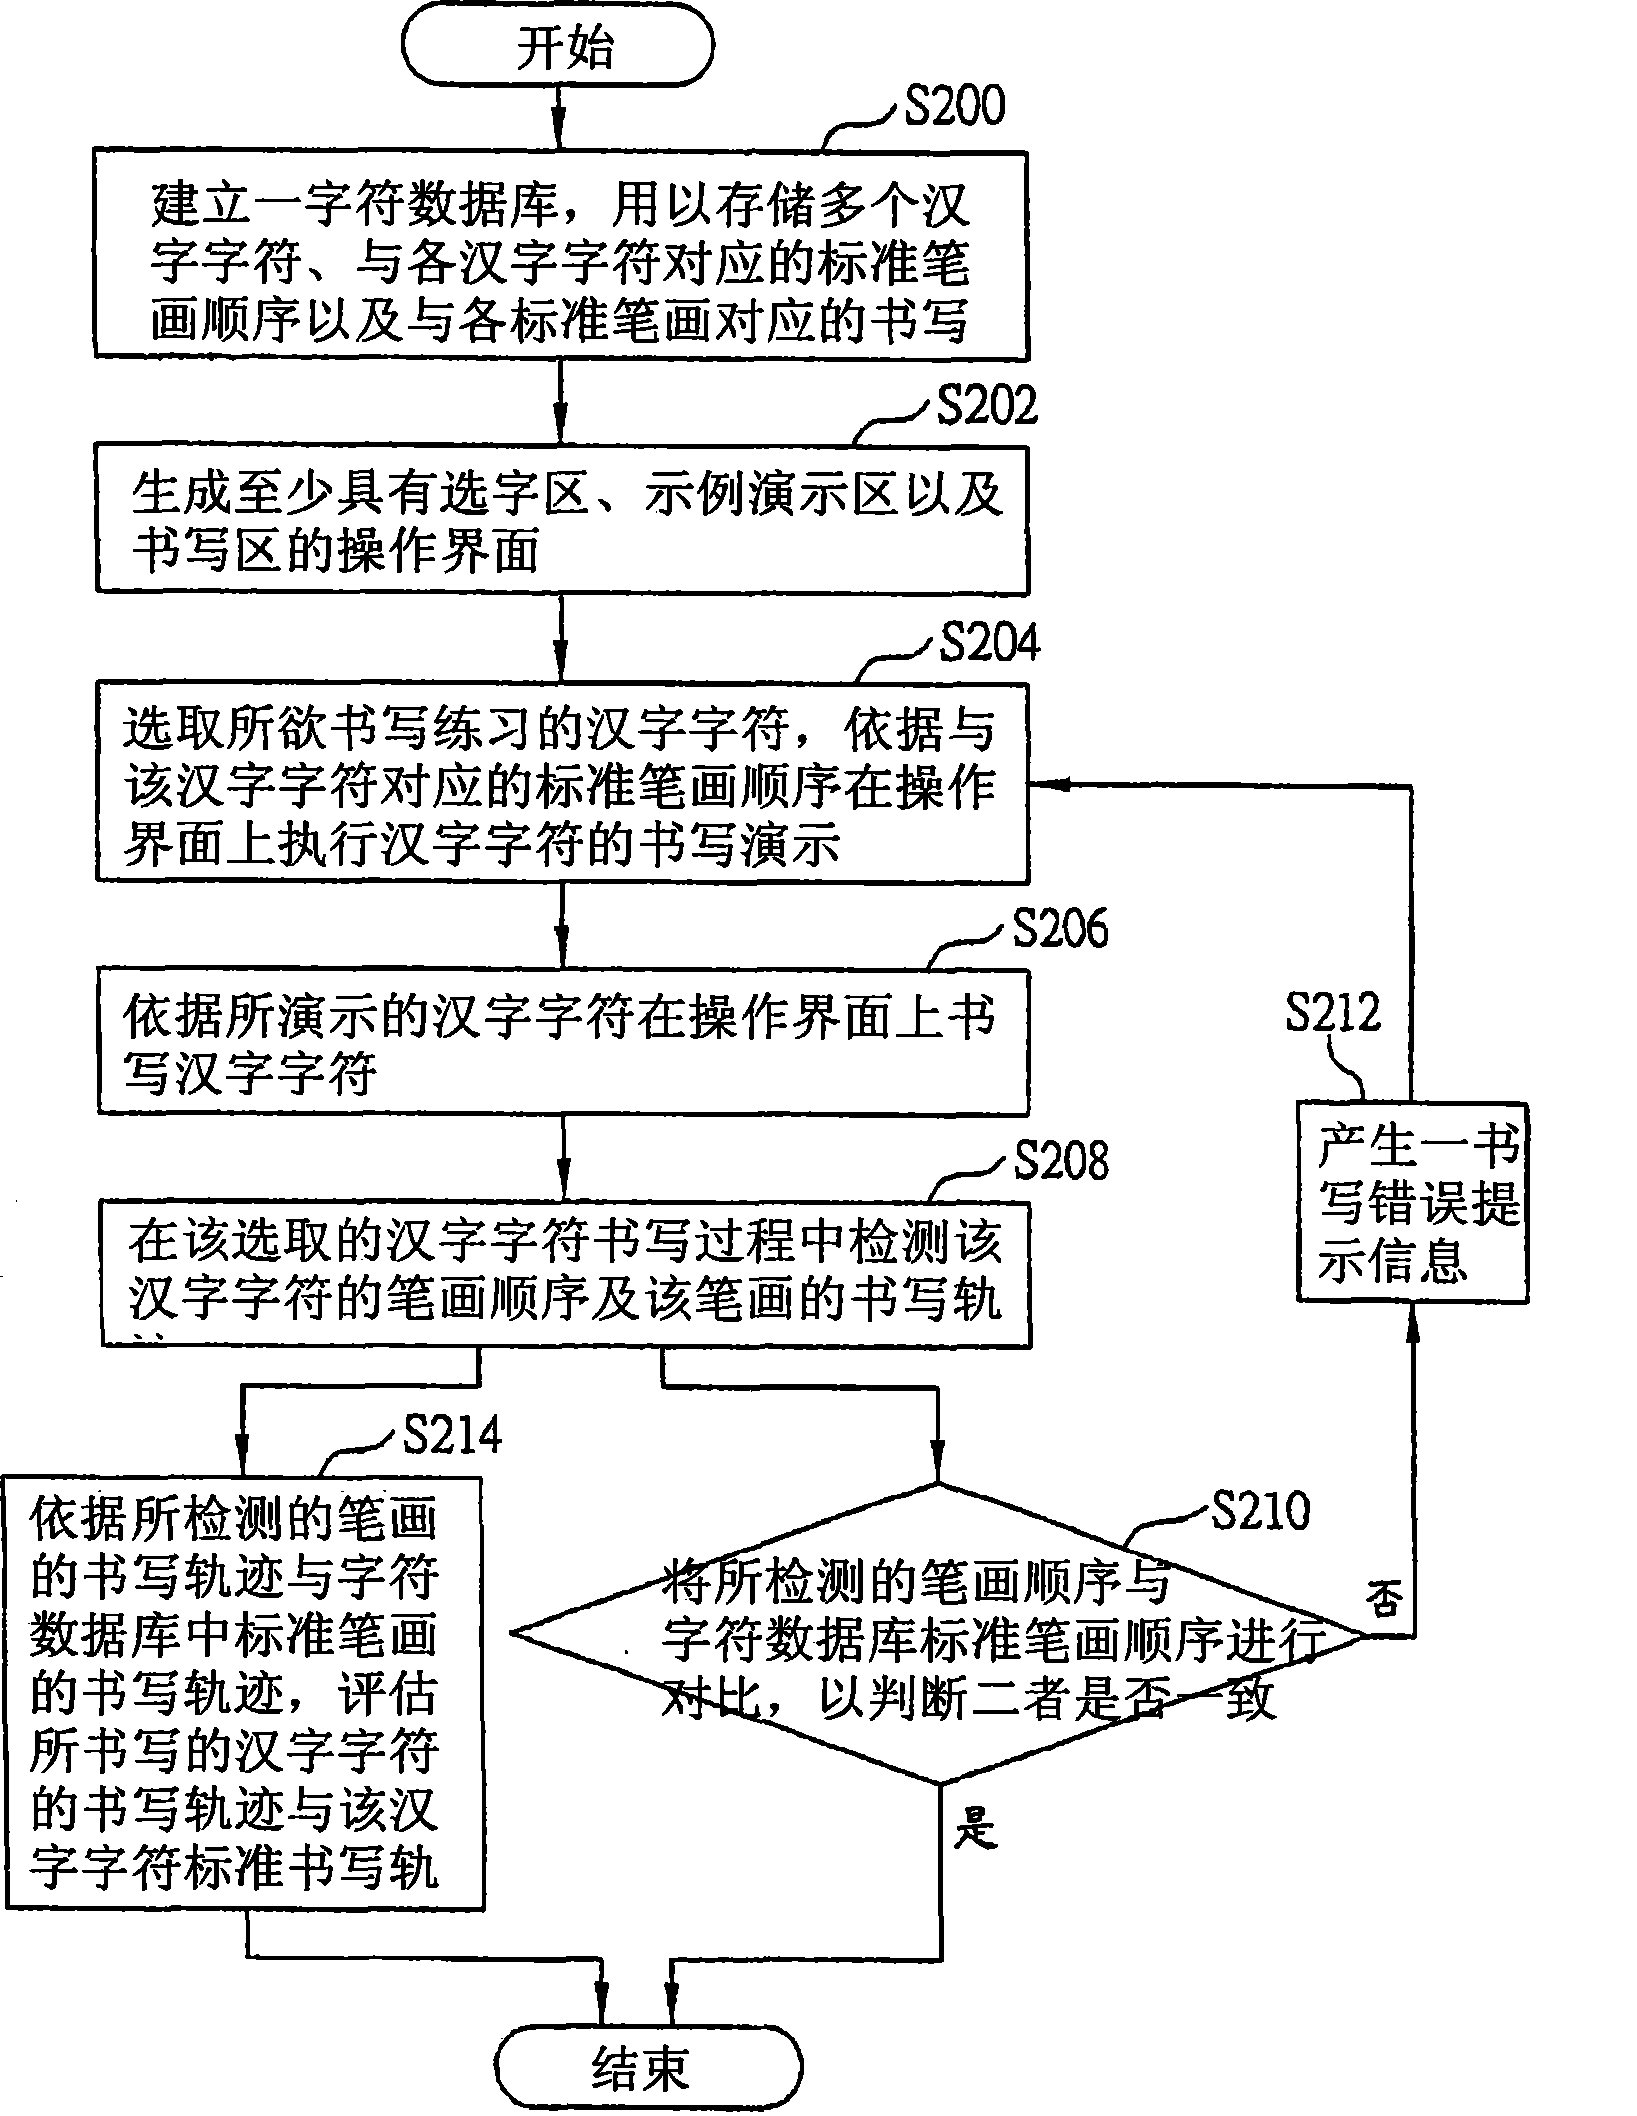 Chinese character writing validation system and method